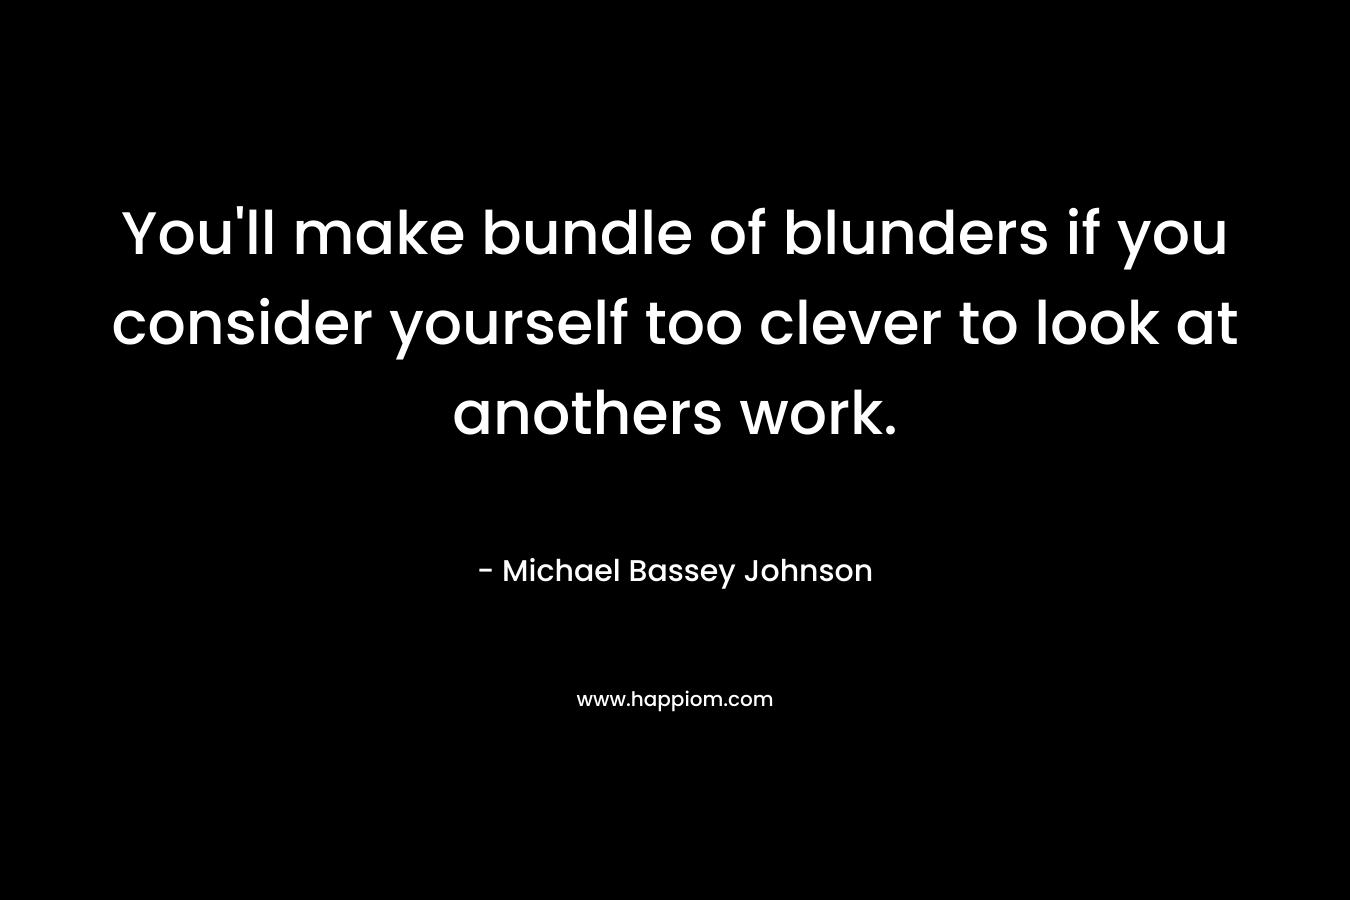 You’ll make bundle of blunders if you consider yourself too clever to look at anothers work. – Michael Bassey Johnson